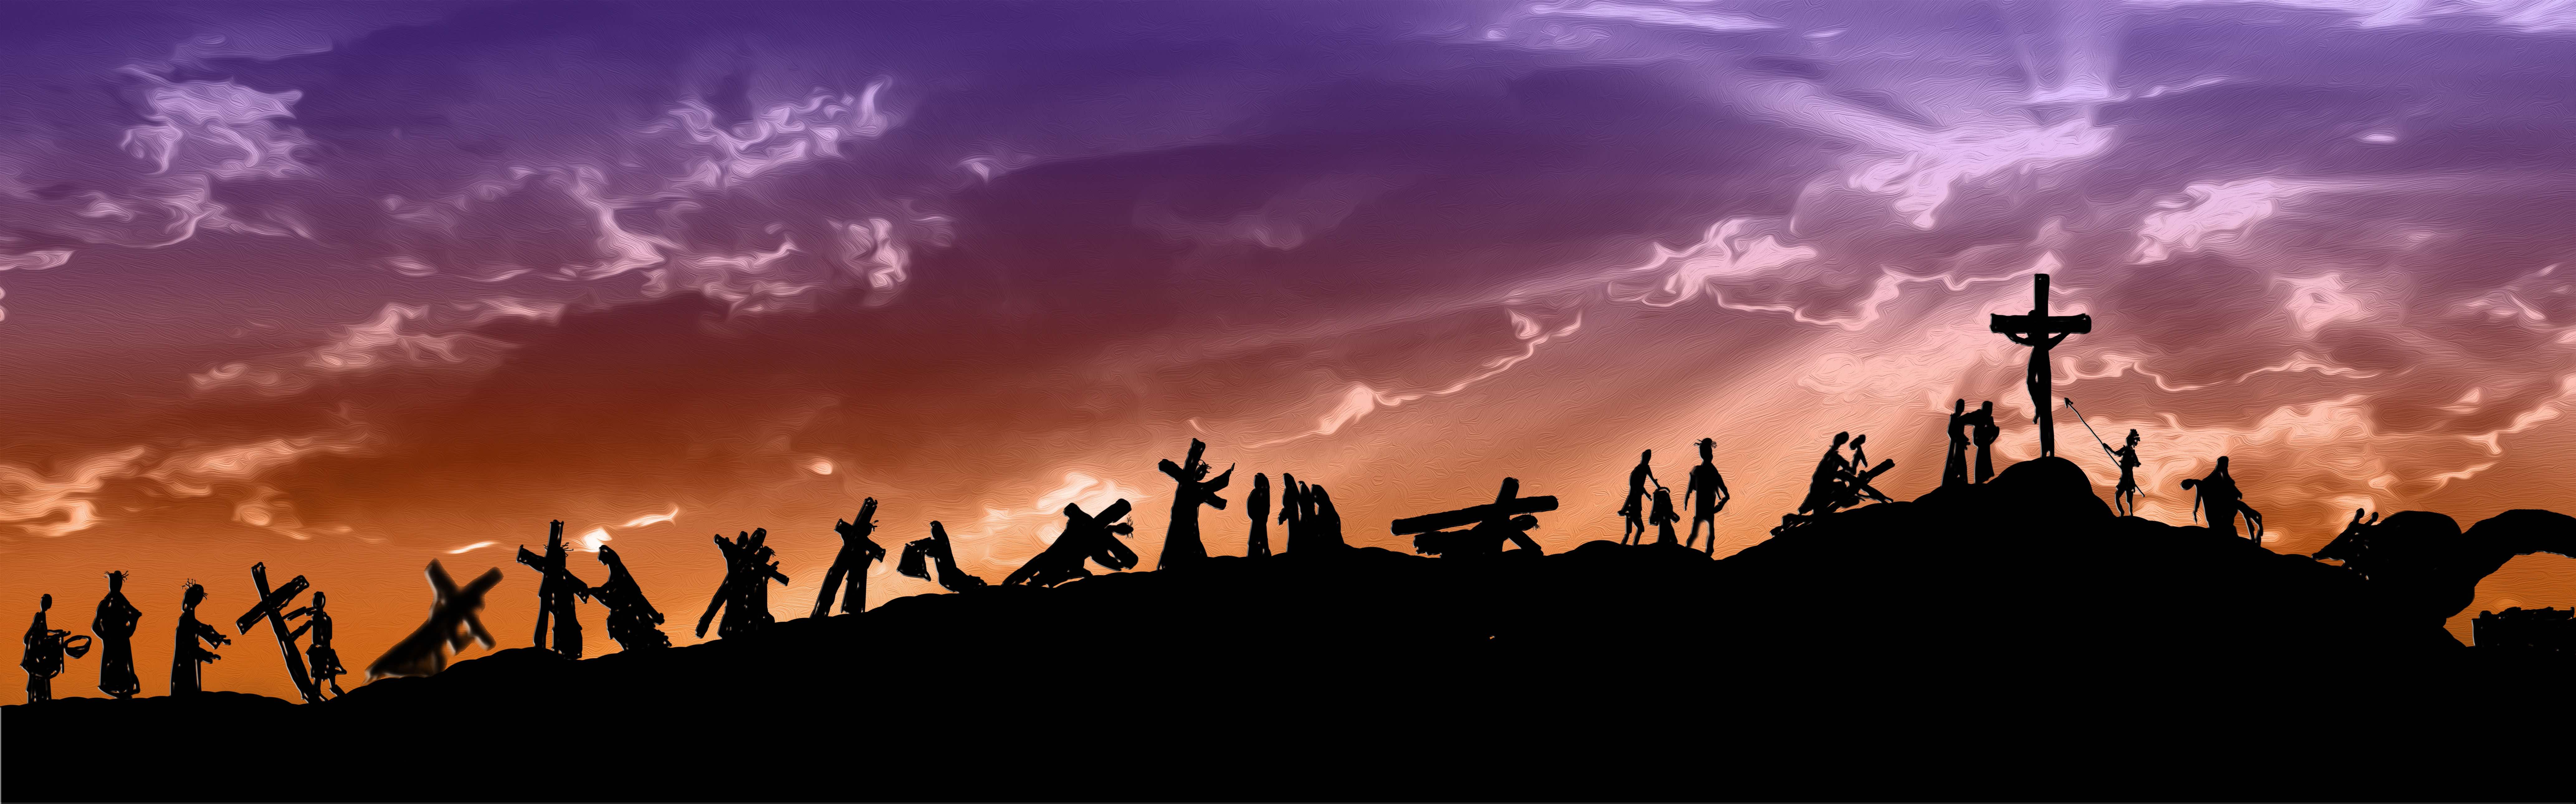 silhouettes of Jesus Christ carrying his cross on Calvary hill